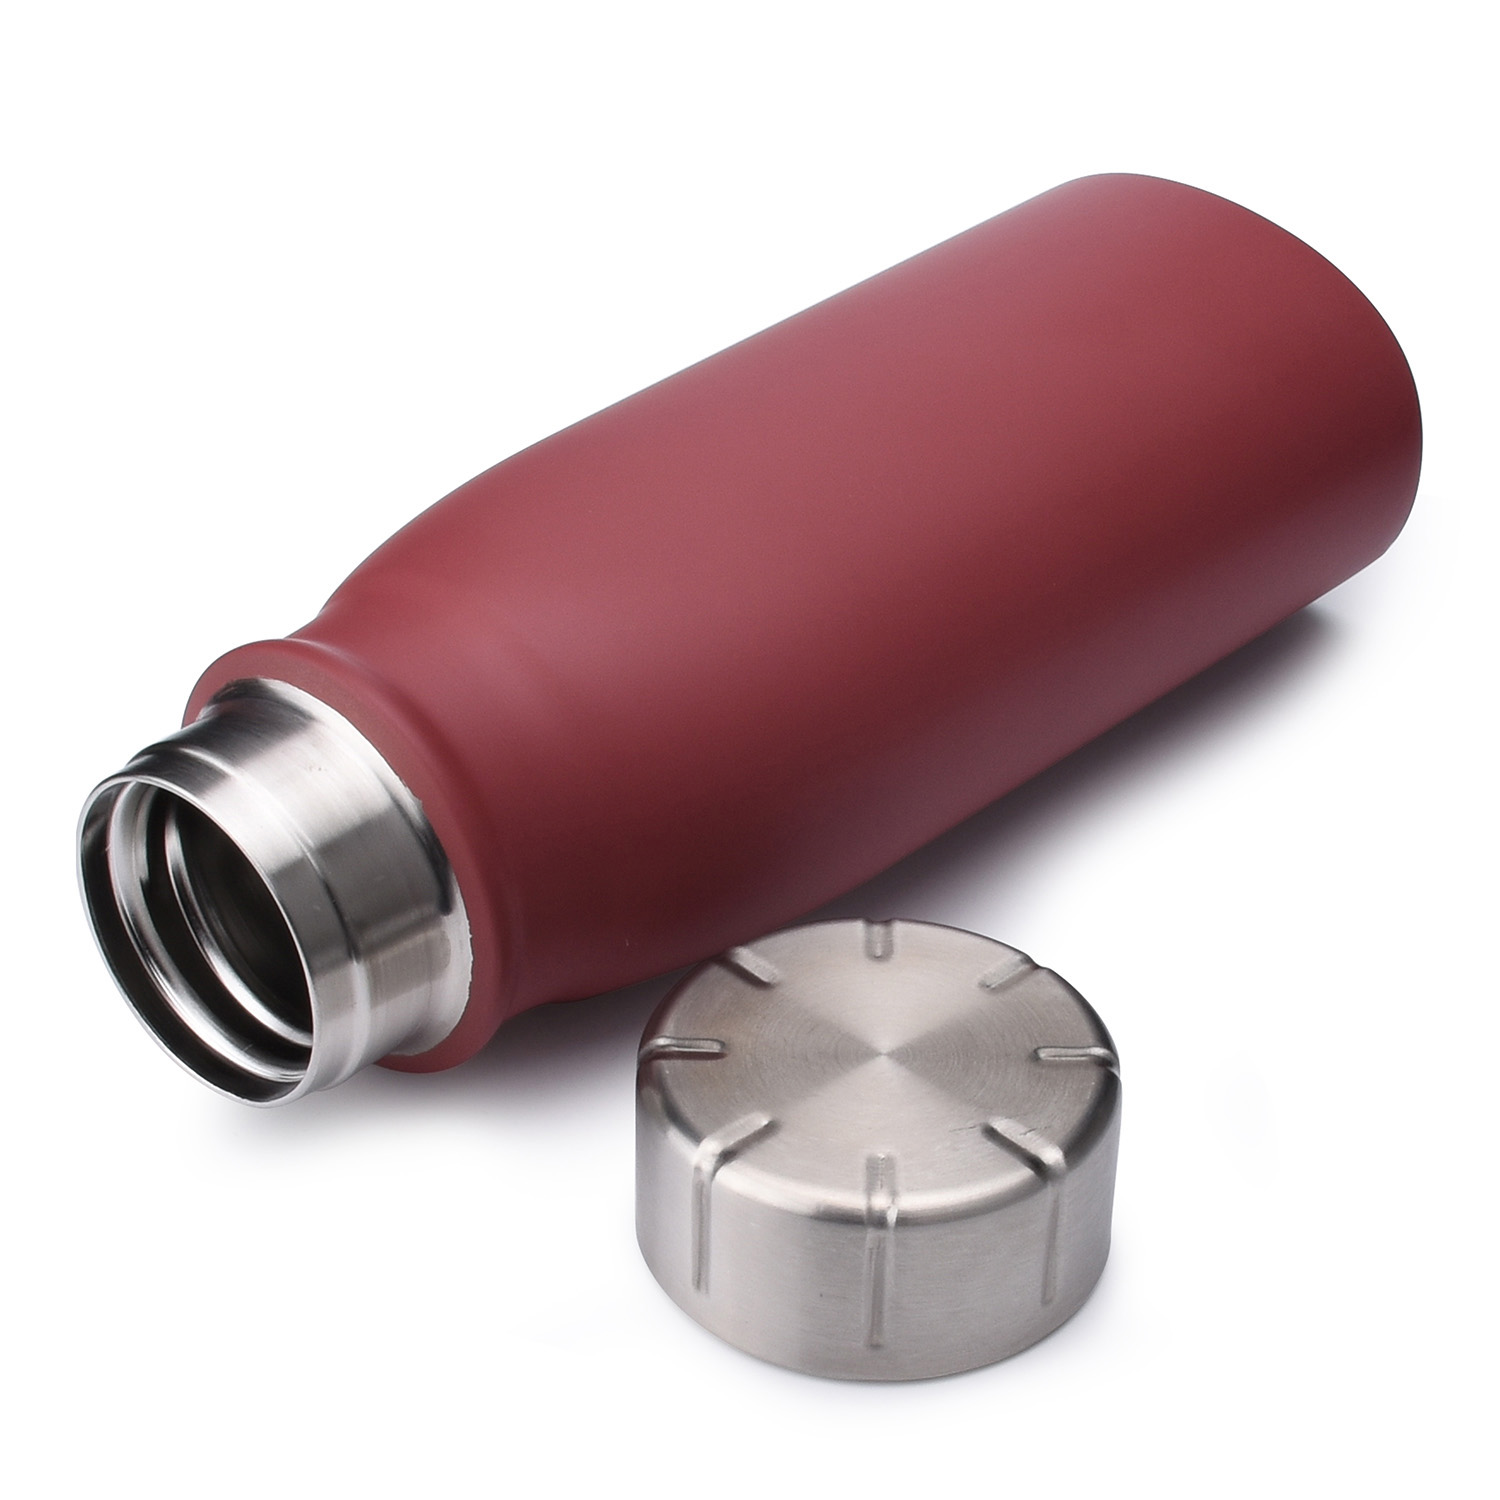 Flat Thermos For Hot Food